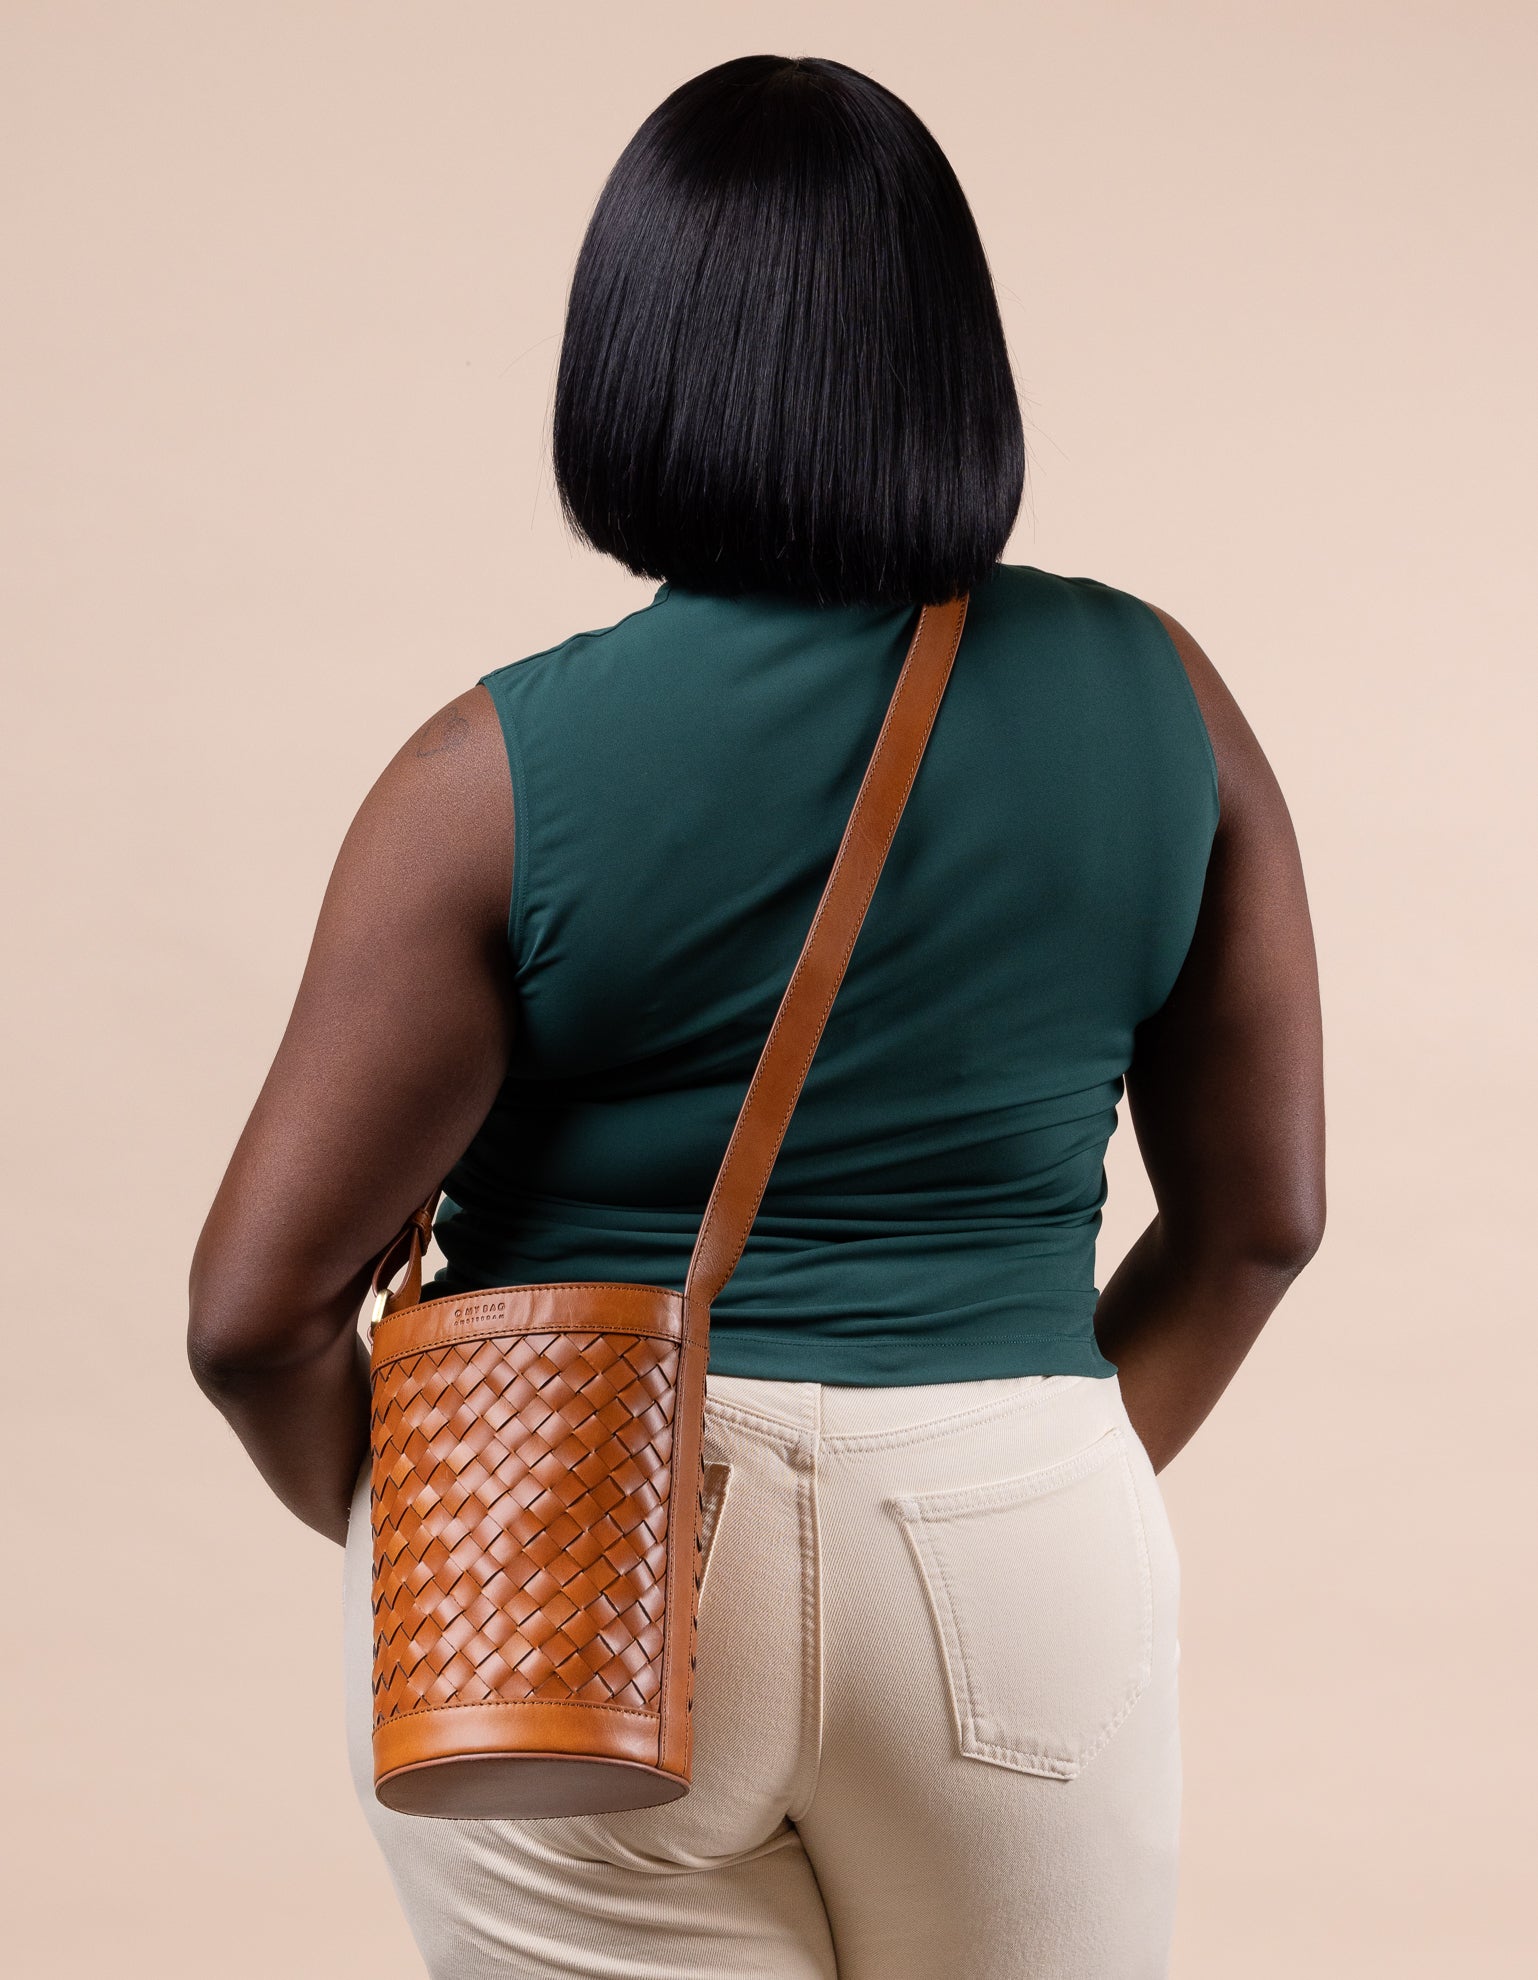 Jules Kae 'Zola' Bag | Dress with sneakers, Clothes design, Fashion tips